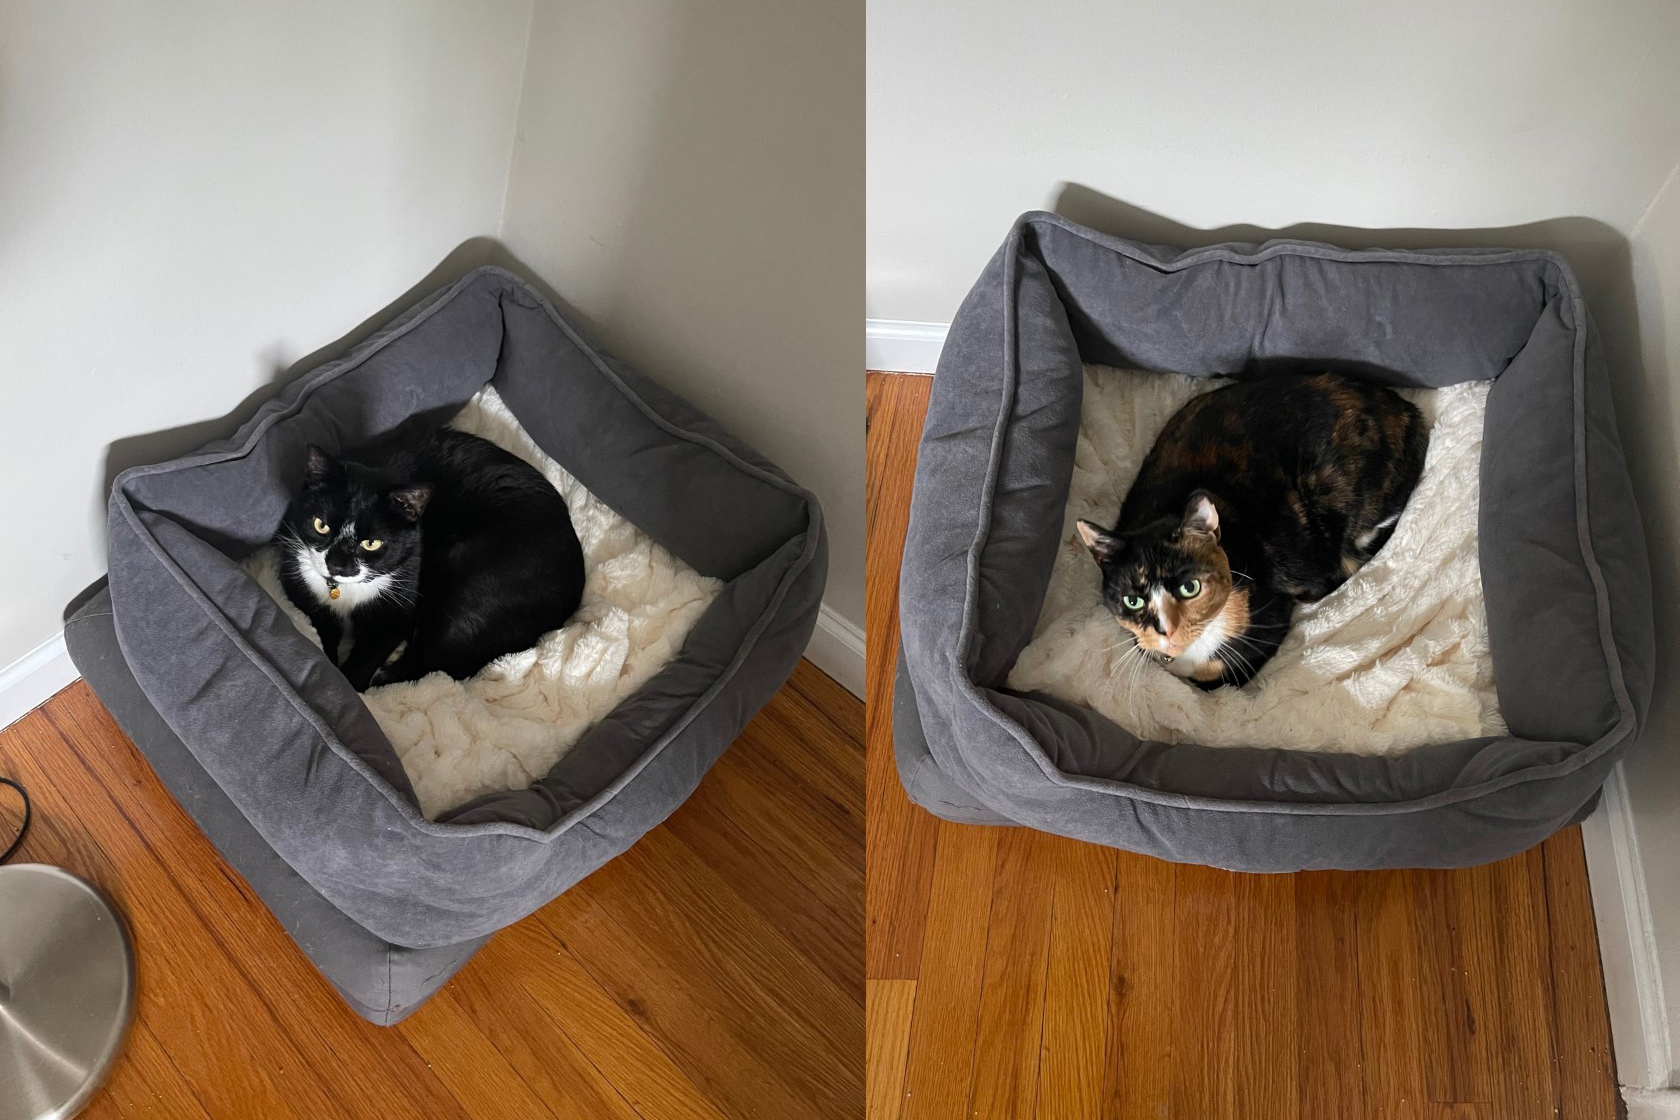 This PetFusion cuddle bed is perfect for my anxious senior dog